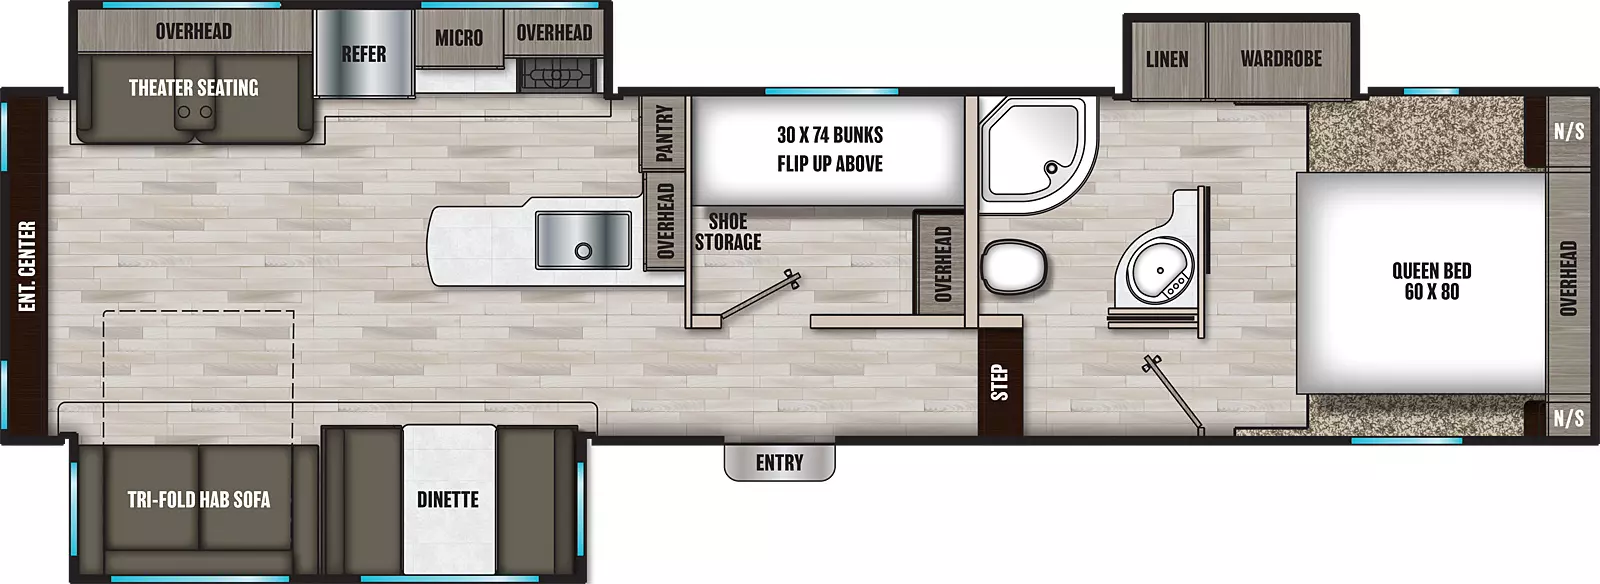 The 30BHS has three slide outs and one entry. Interior layout front to back: front bedroom with a foot facing queen bed, overhead cabinet, night stands on each side, and off-door side slideout with wardrobe and linen cabinet; off-door side full pass-through bathroom; step down to the off-door side bunk room with overhead storage, shoe storage, and bunks with top bunk flip-up; entry door across from bunk room; off-door side peninsula kitchen counter that wraps from the middle of the unit to the inner wall with overhead cabinet and pantry; off-door side slideout with overhead cabinet, microwave, refrigerator, and theater seating with overhead cabinet; door side slideout with dinette and tri-fold hide-a-bed sofa; rear entertainment center.